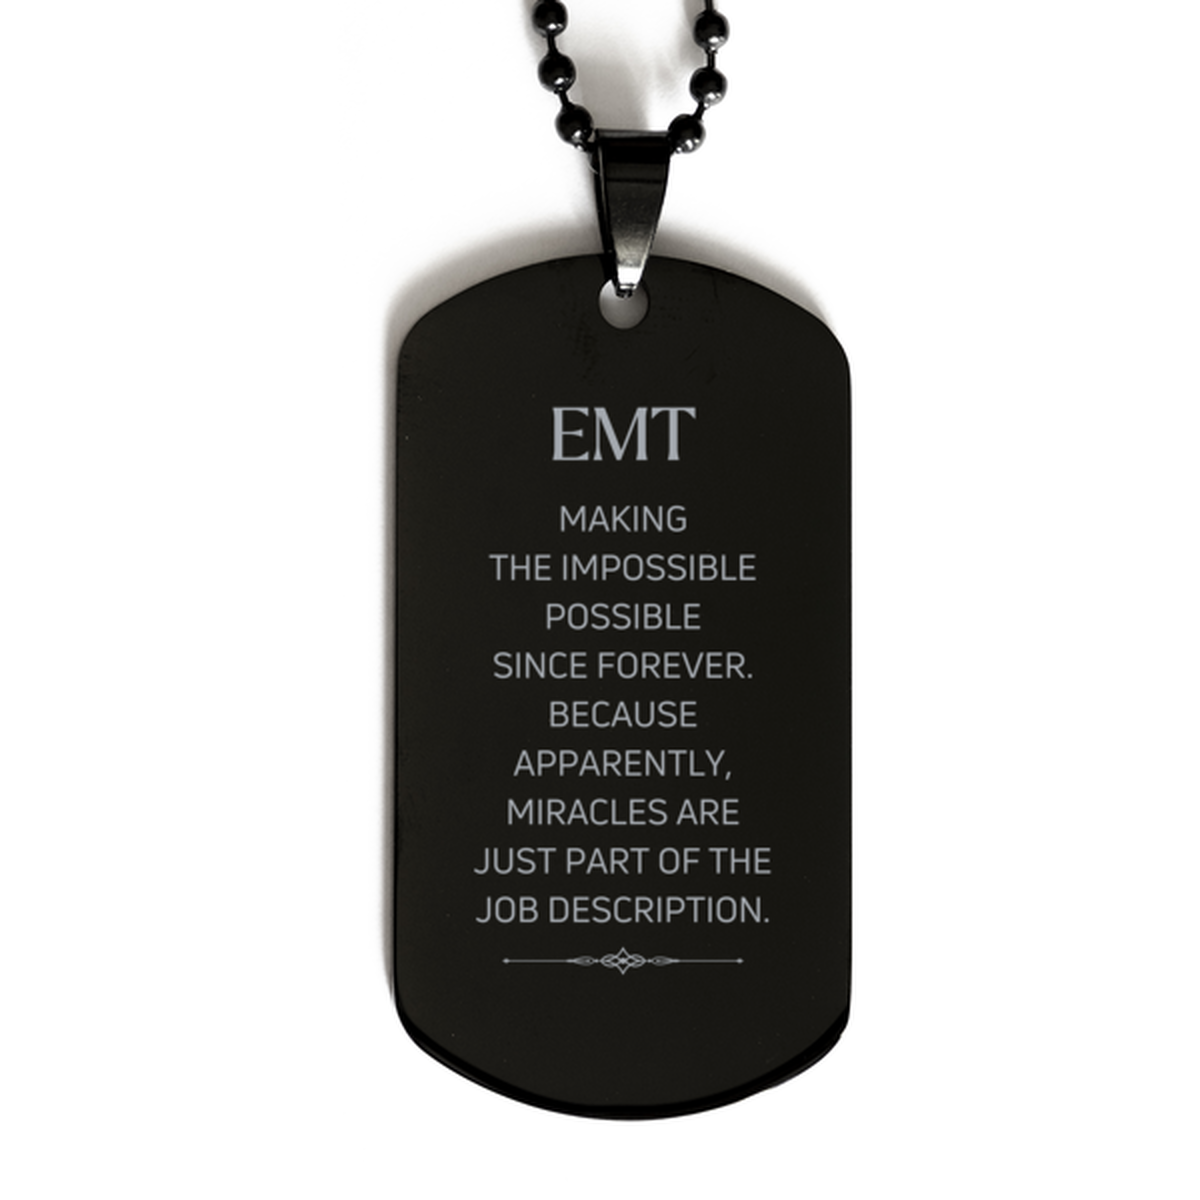 Funny EMT Gifts, Miracles are just part of the job description, Inspirational Birthday Black Dog Tag For EMT, Men, Women, Coworkers, Friends, Boss